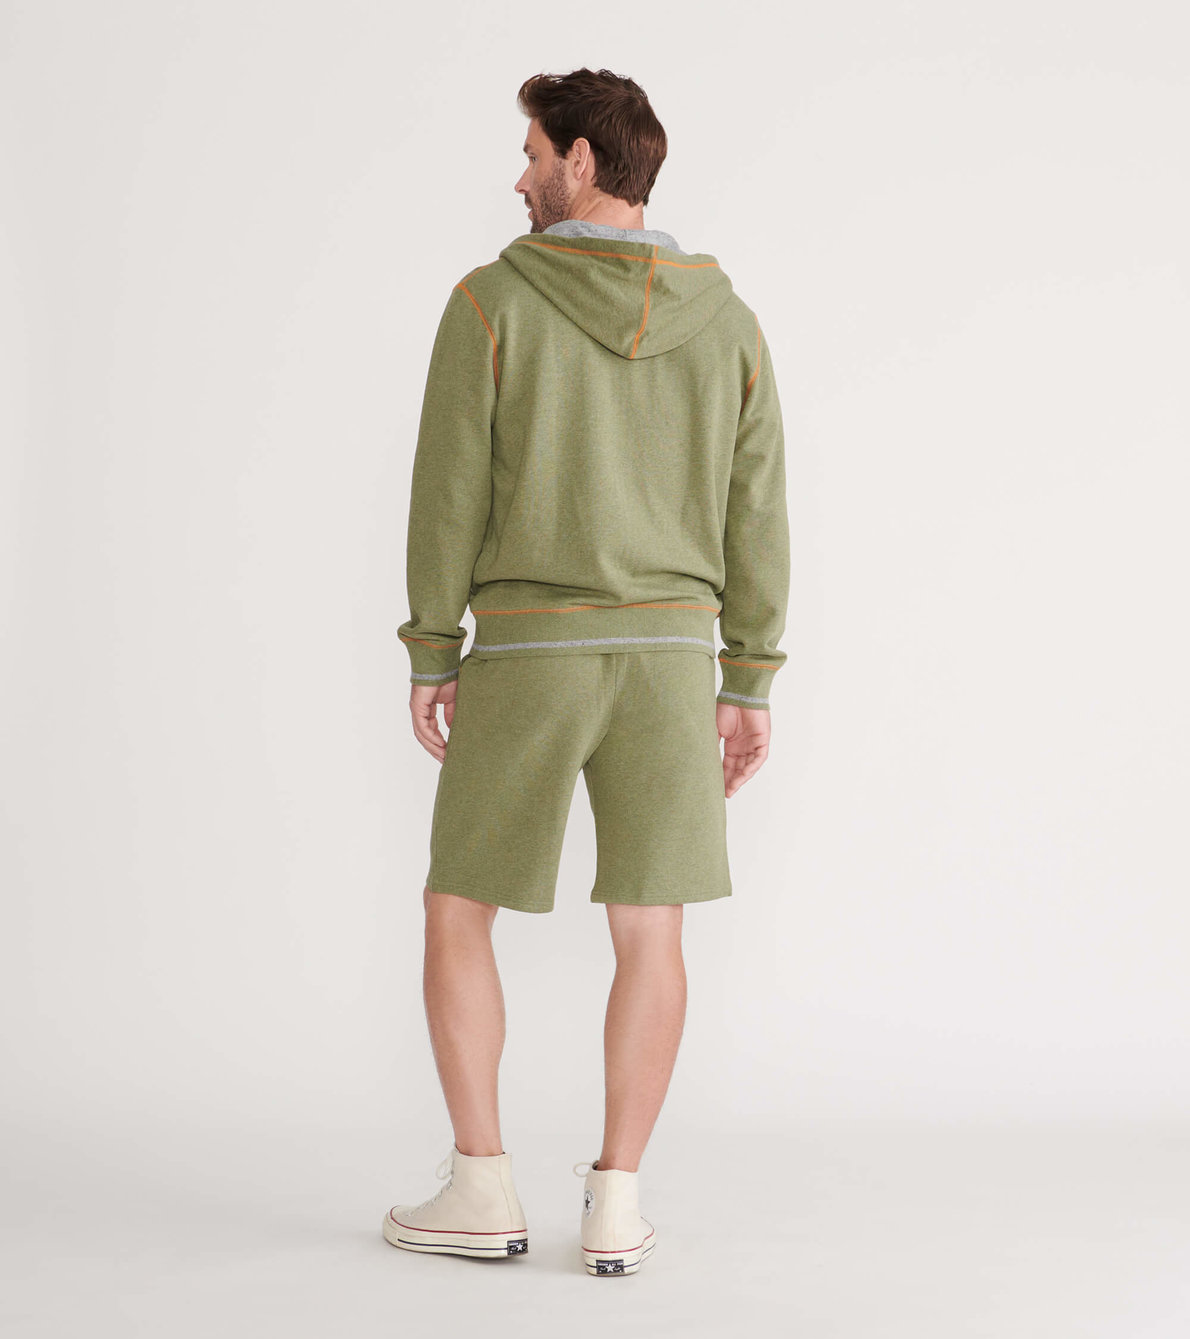 View larger image of Forest Green Moose Men's Heritage Separates with Shorts